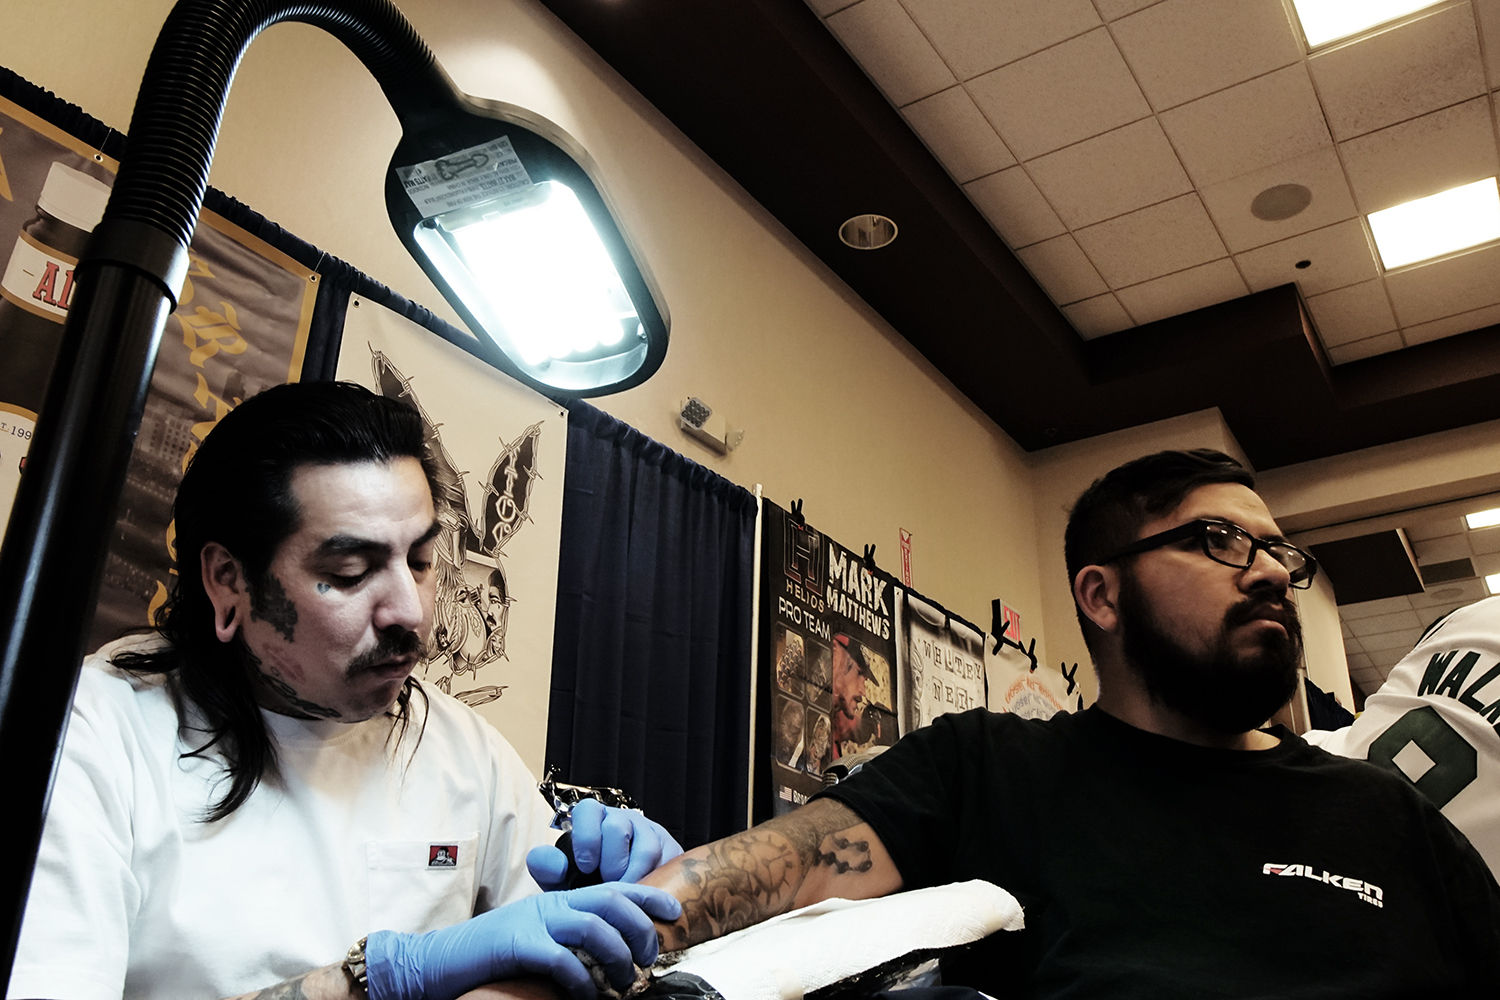 G butch felix tattooing client's arm at tattoo expo at feather falls casino, california